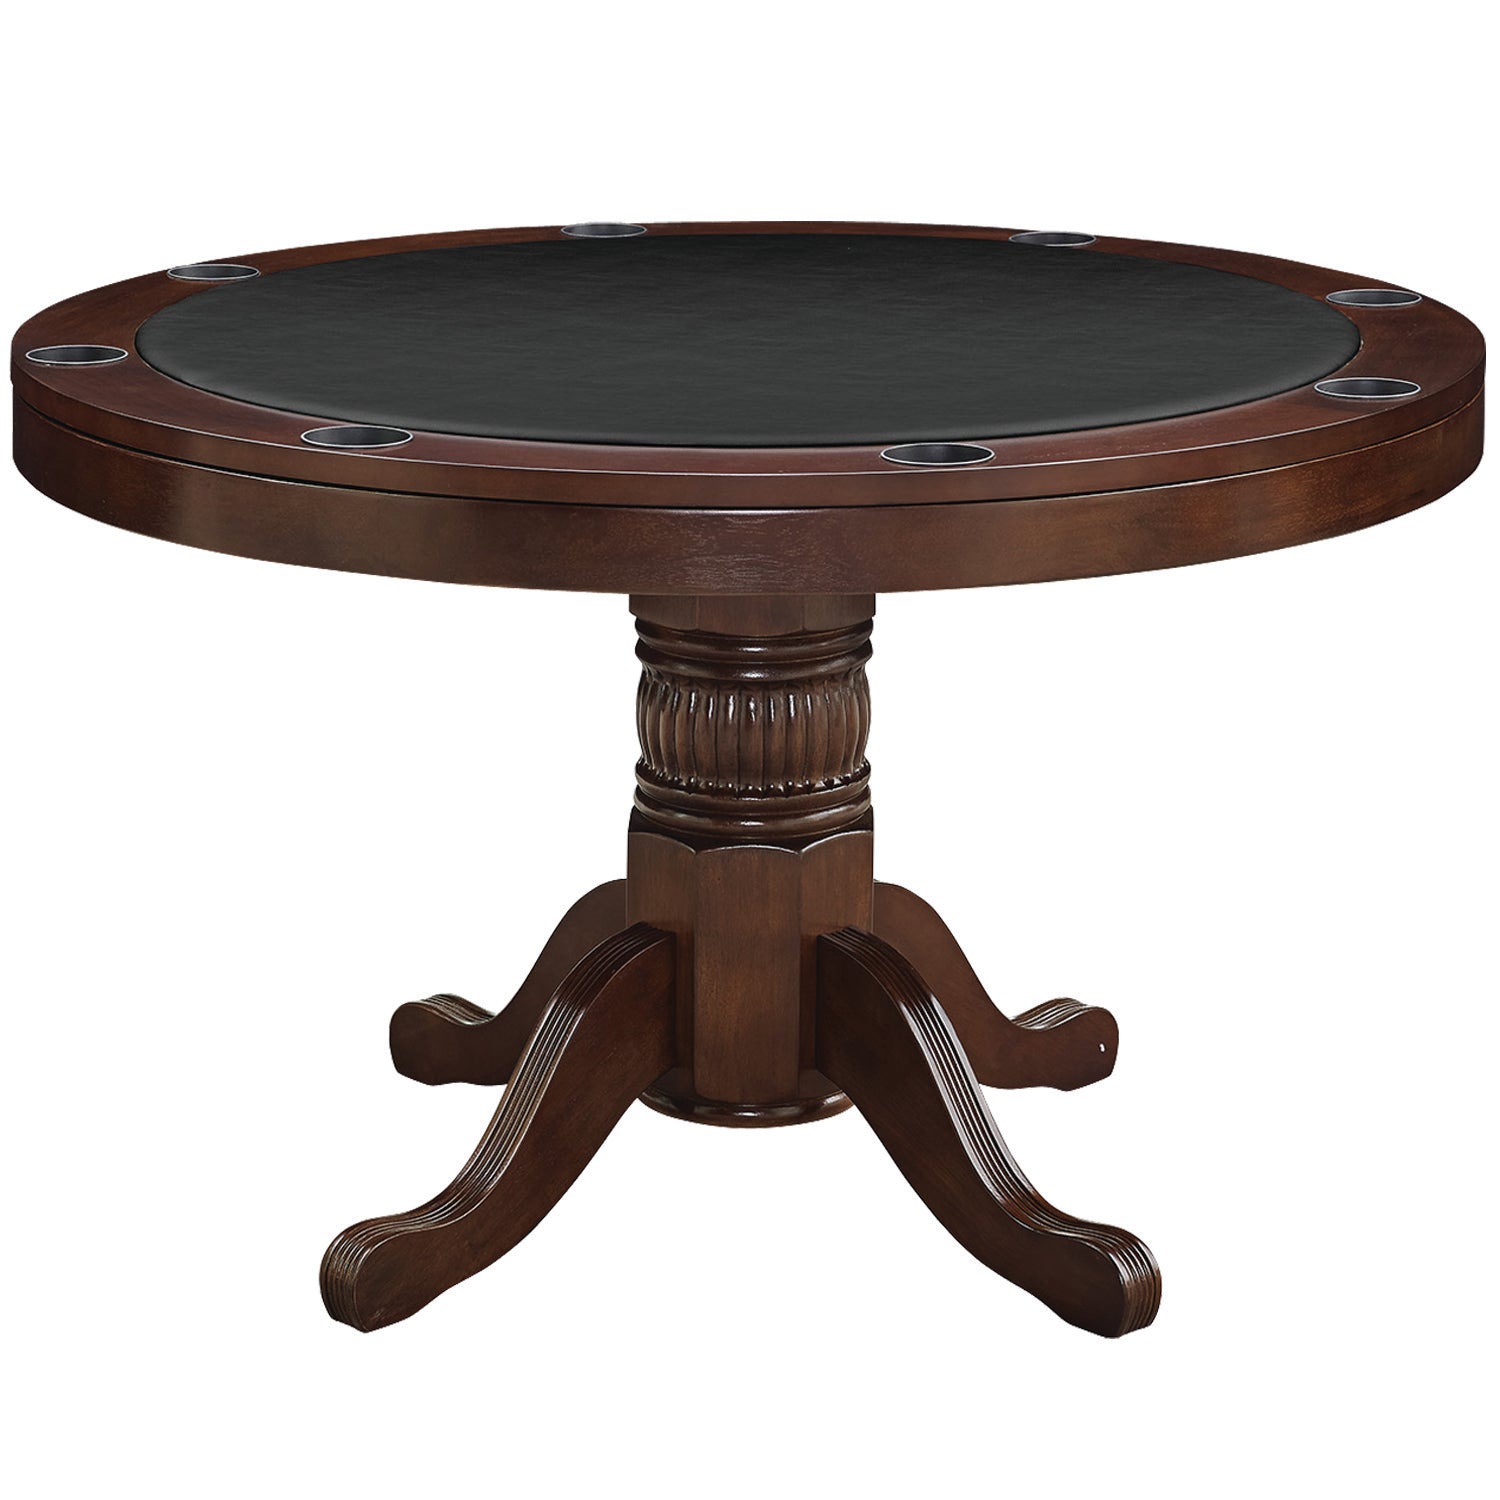 Round convertible game table with a black padded vinyl game top in a cappuccino finish.